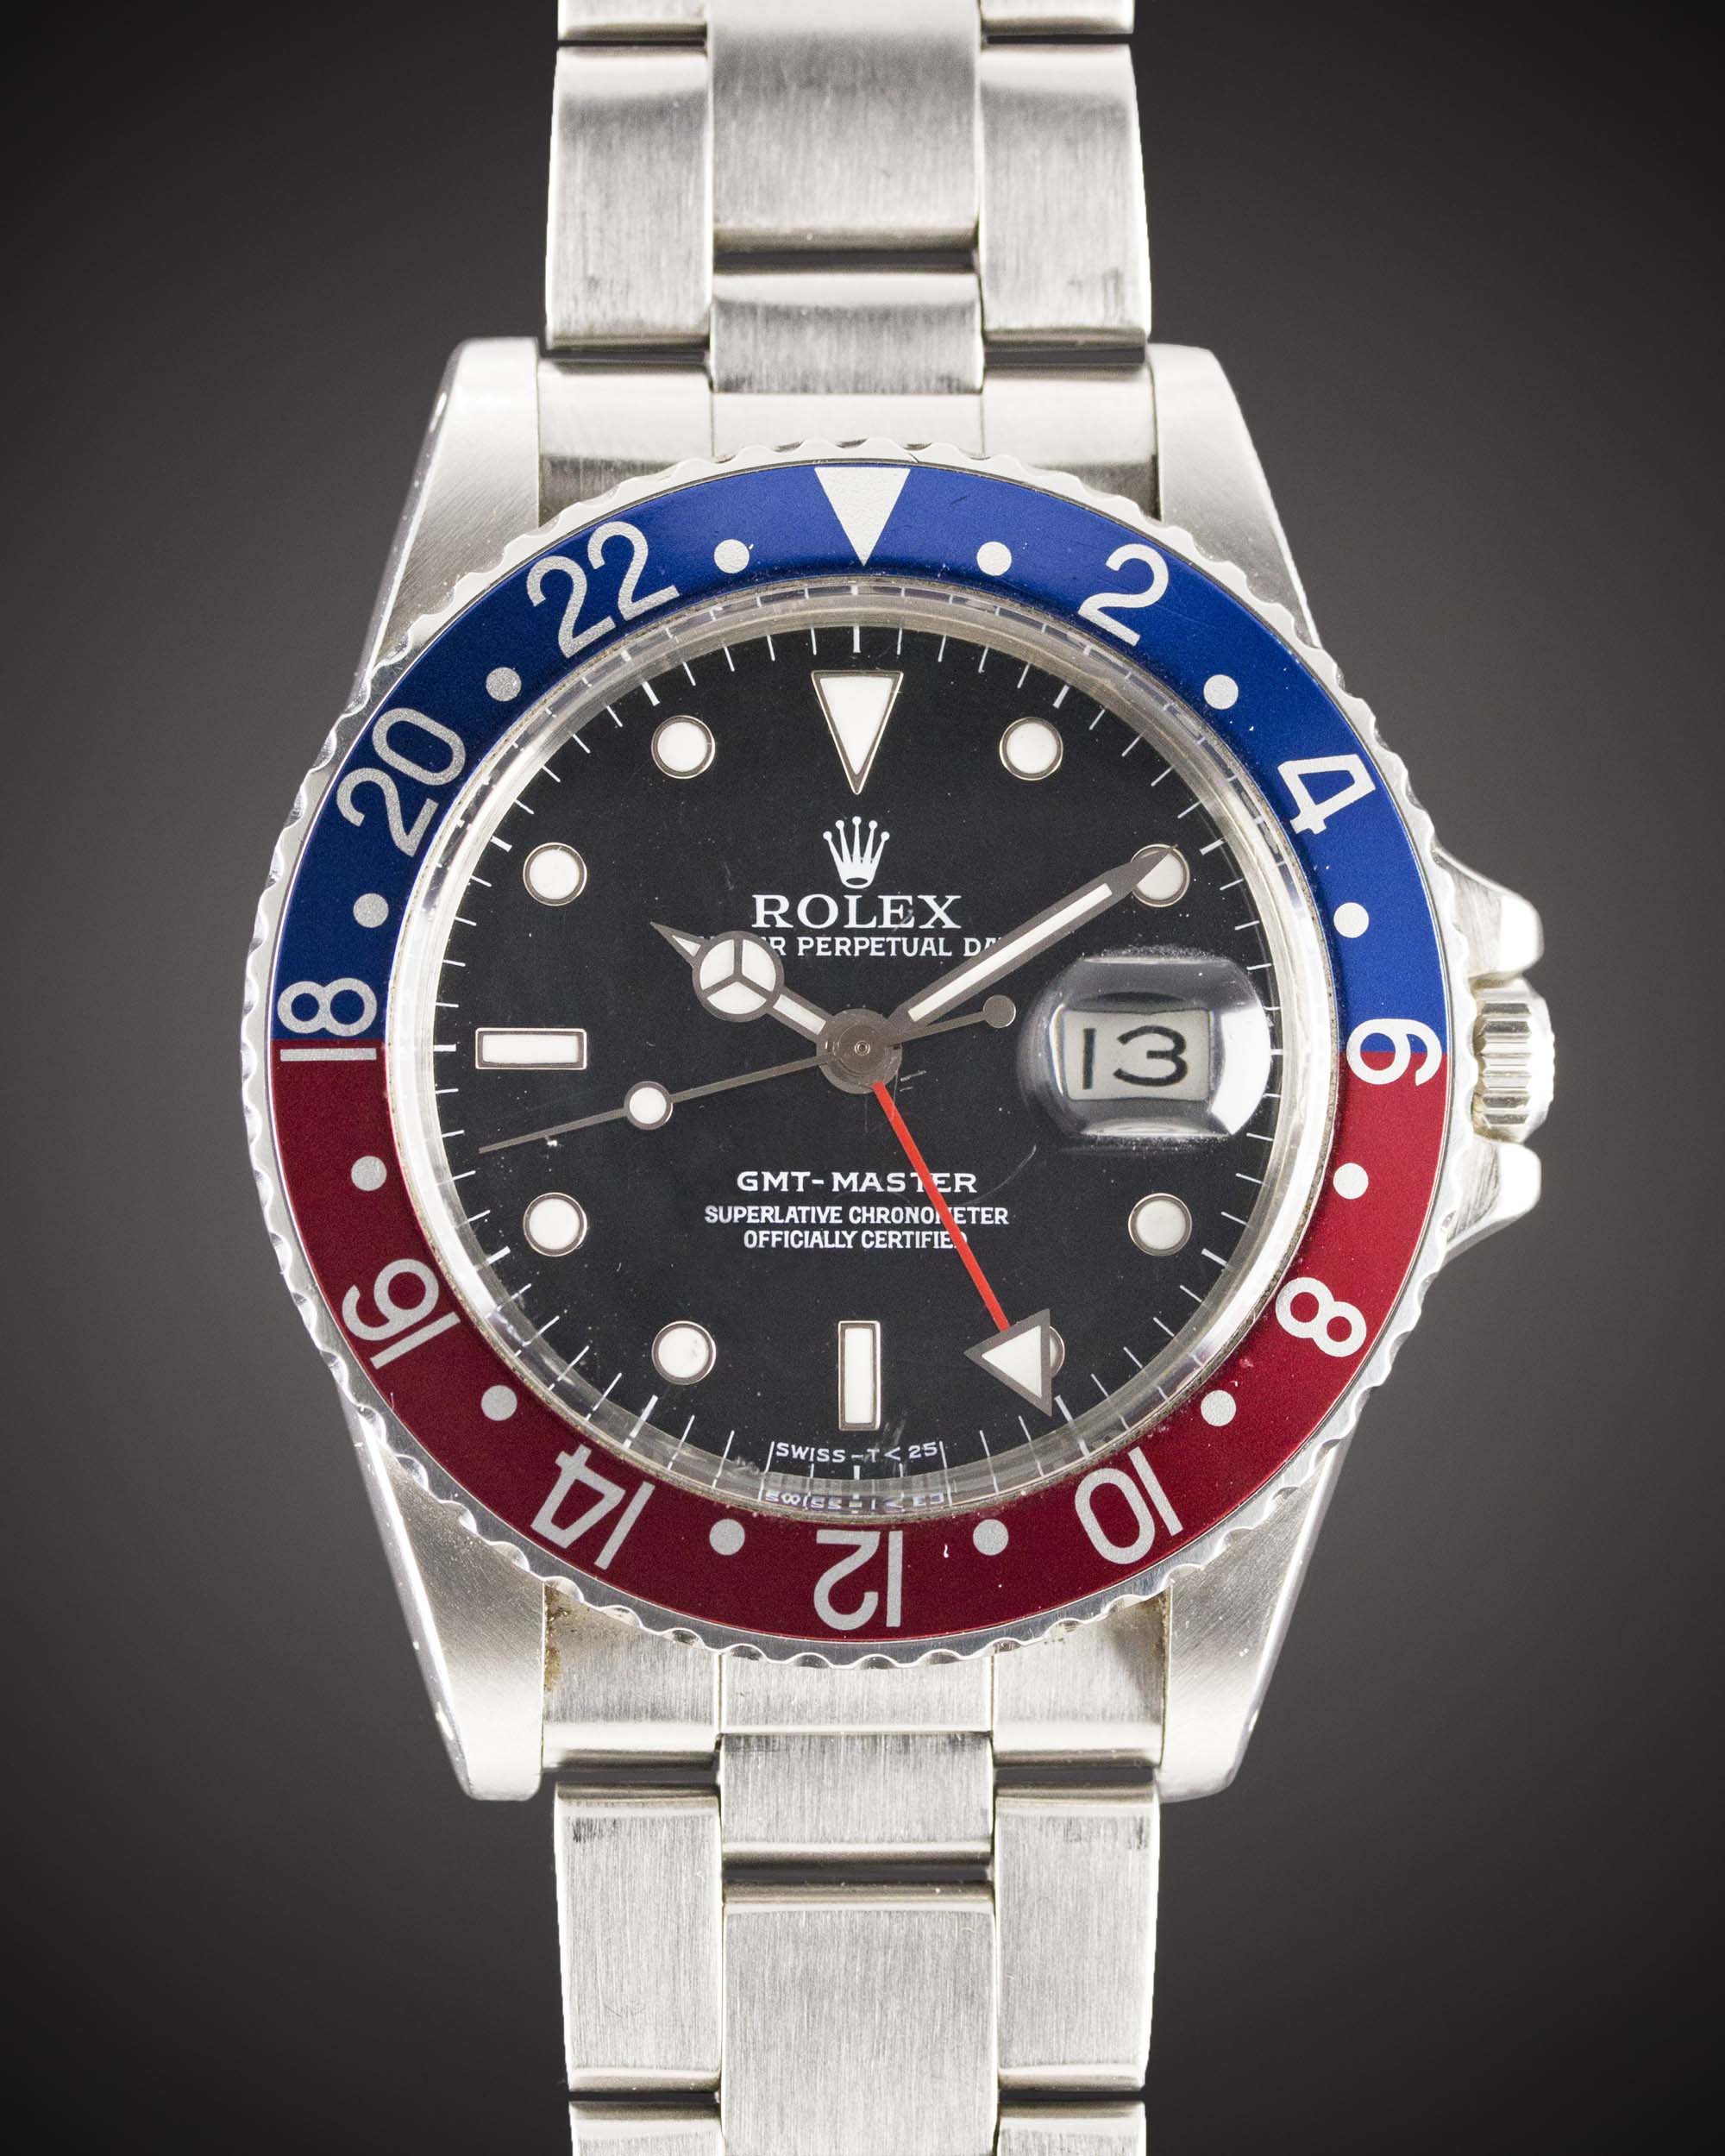 A RARE GENTLEMAN'S STAINLESS STEEL ROLEX OYSTER PERPETUAL DATE GMT MASTER "PEPSI" BRACELET WATCH - Image 3 of 3